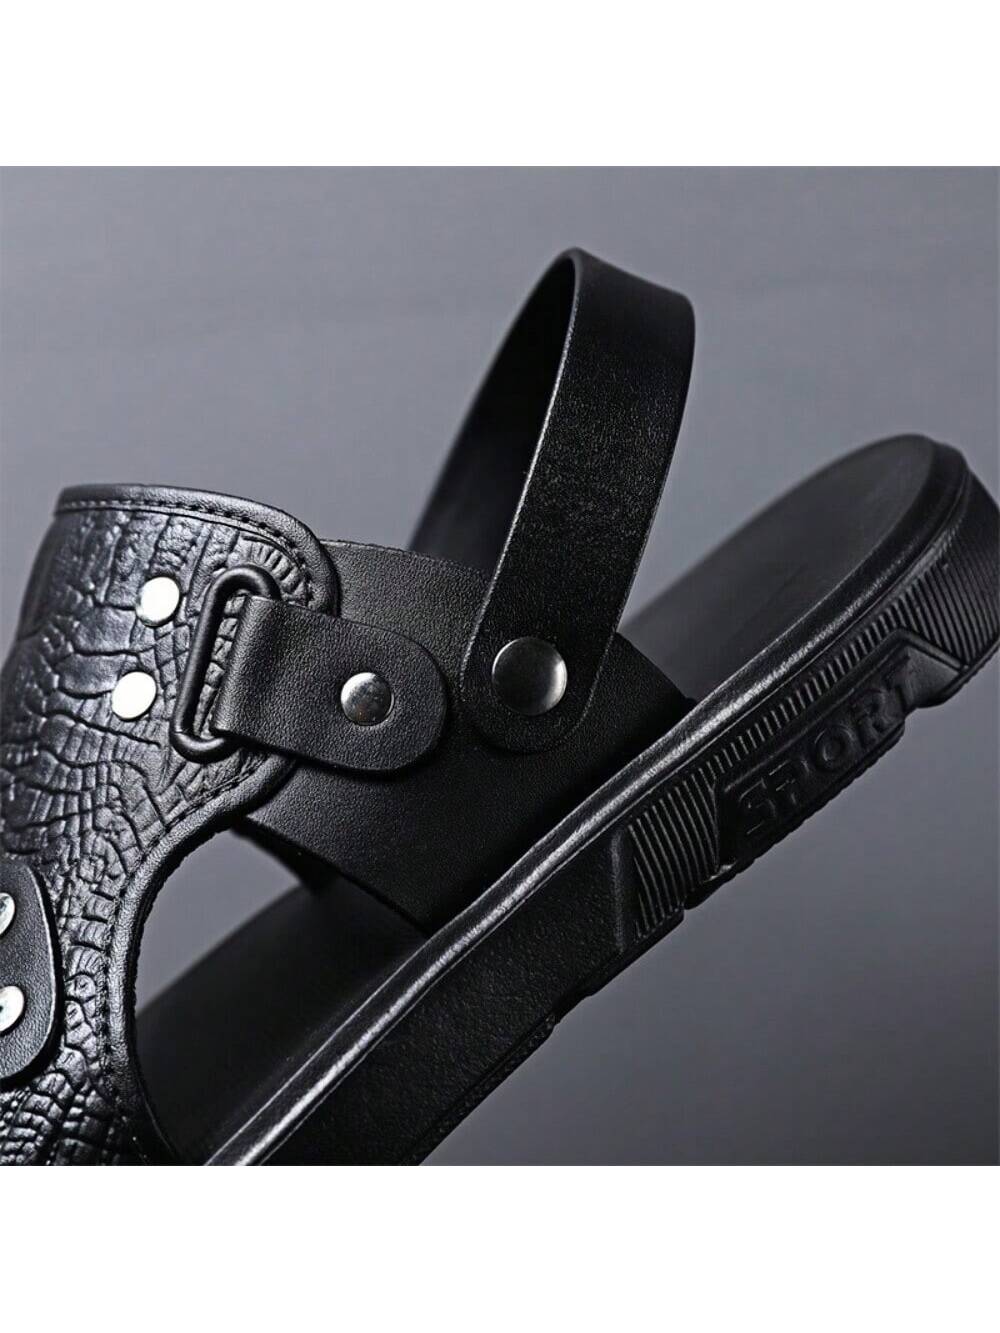 Men's Dual-Purpose Wear-Resistant, Breathable, Anti-Skid, Waterproof, Lightweight & Fashionable Slip-On Sandals Casual Shoes